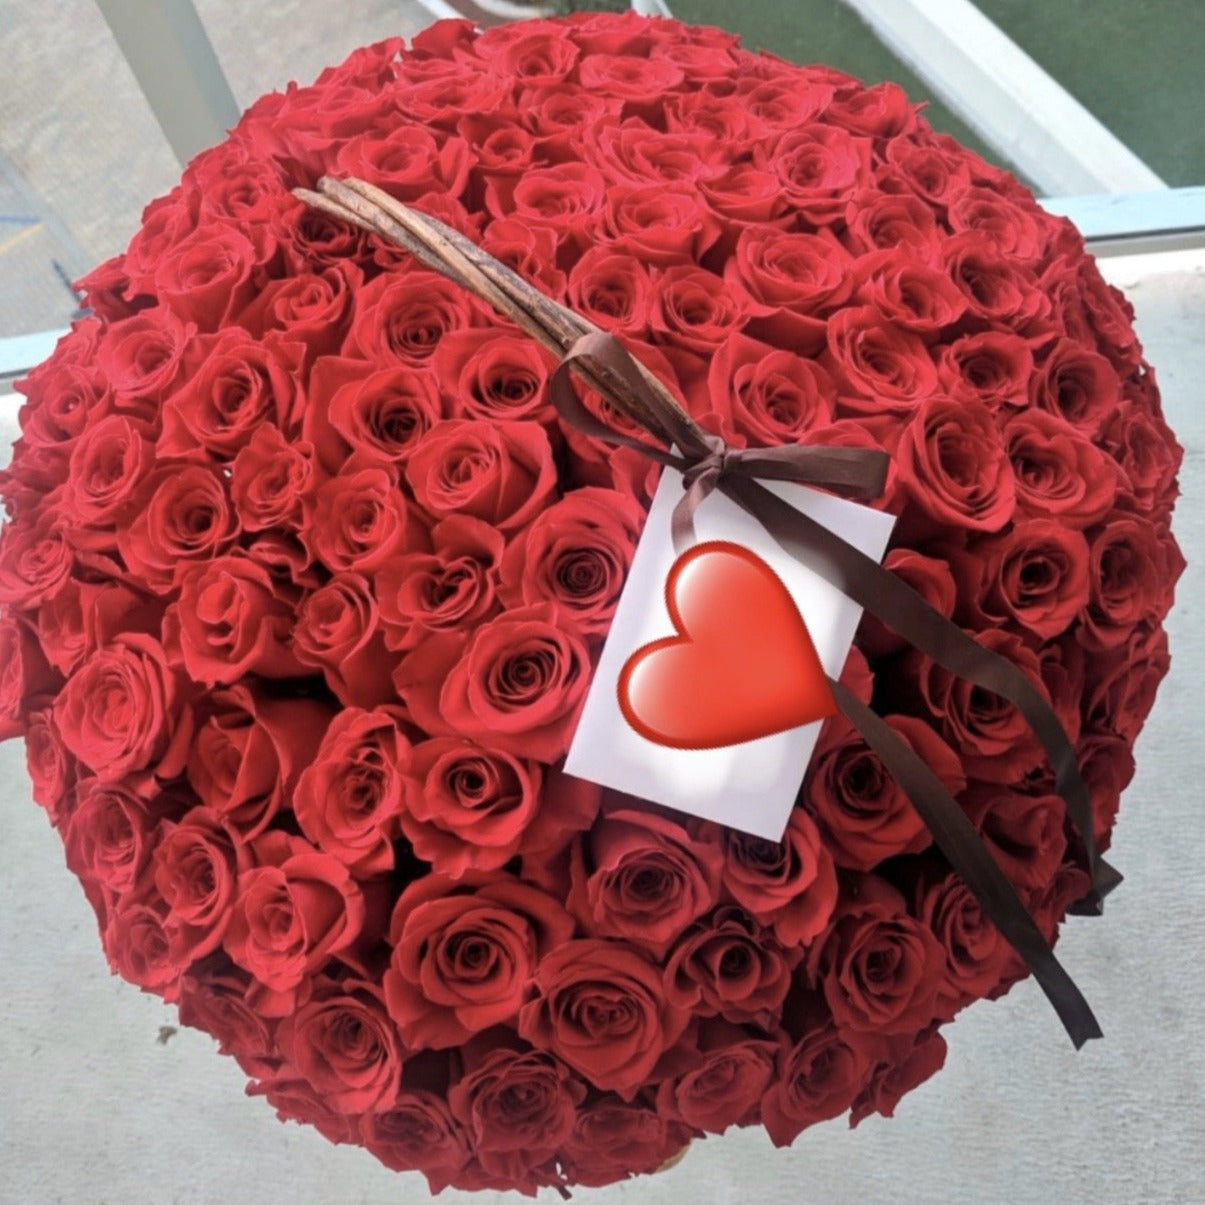 Rossini Basket with red roses